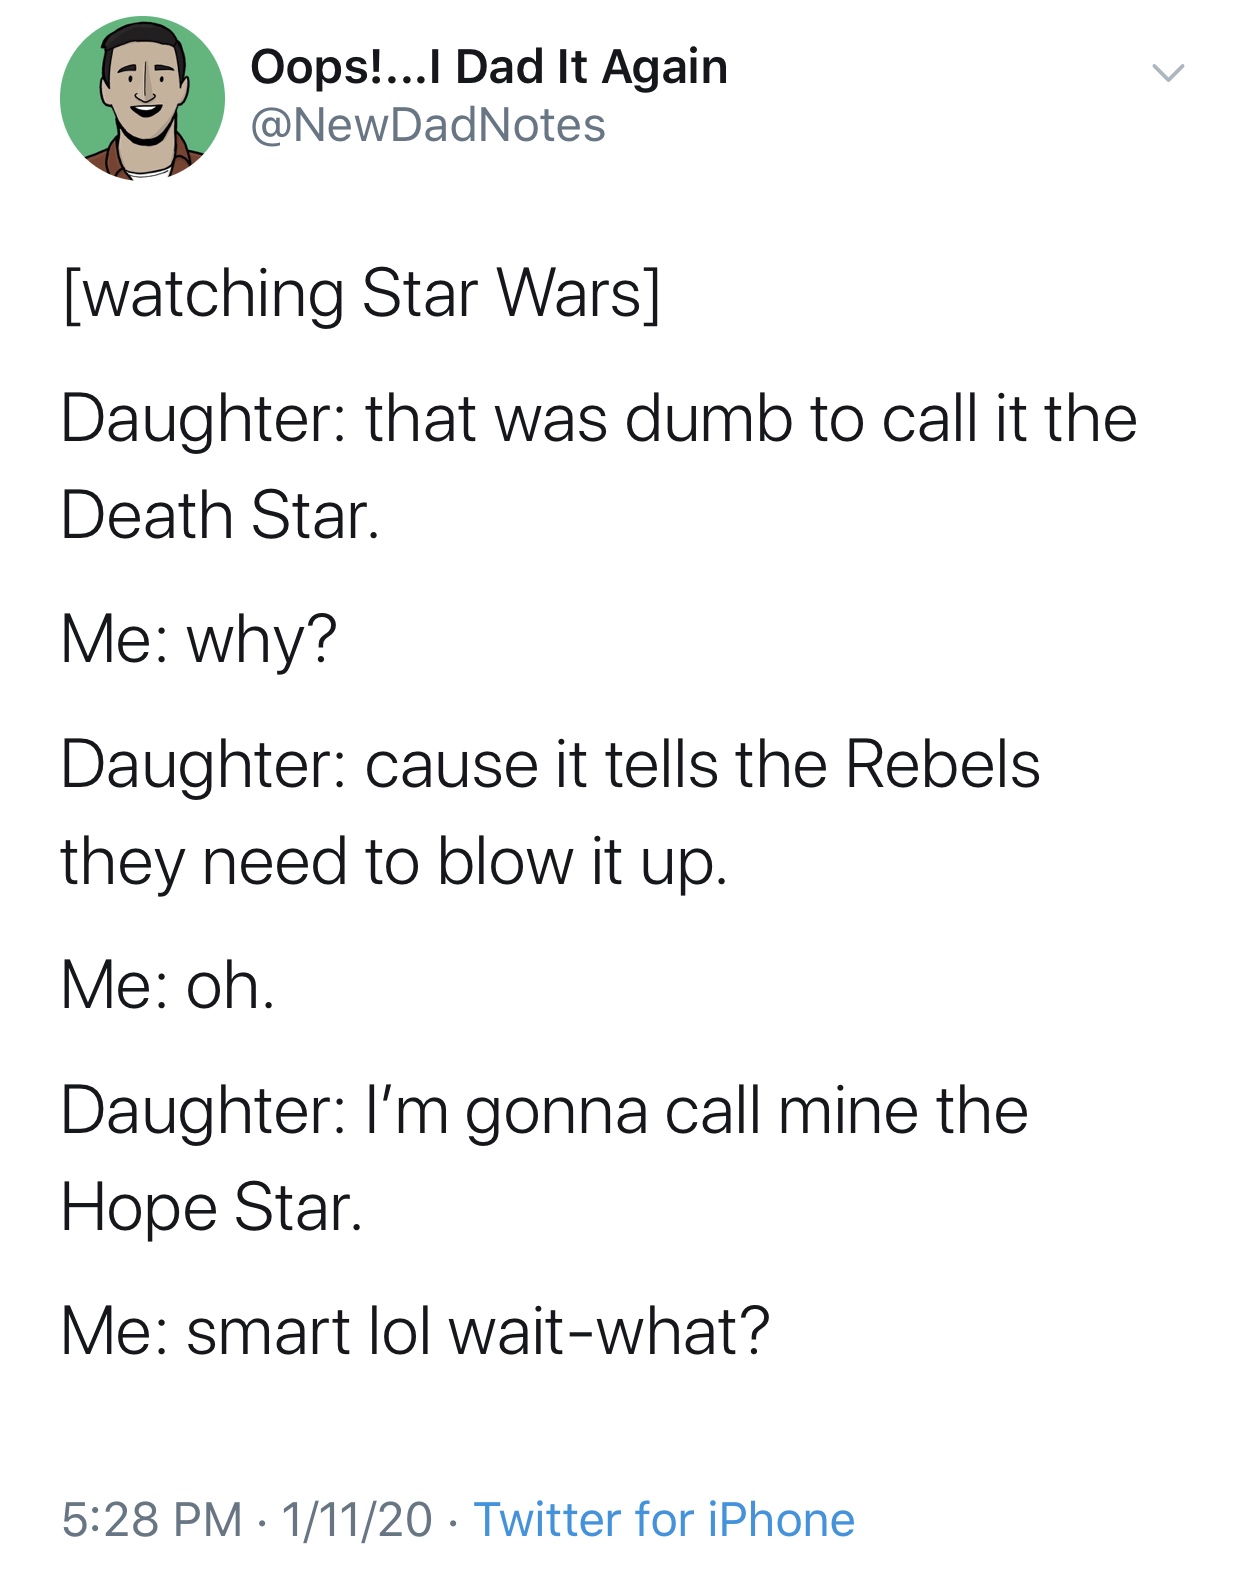 angle - Oops!...I Dad It Again watching Star Wars Daughter that was dumb to call it the Death Star. Me why? Daughter cause it tells the Rebels they need to blow it up. Me oh. Daughter I'm gonna call mine the Hope Star. Me smart lol waitwhat? 11120 Twitter